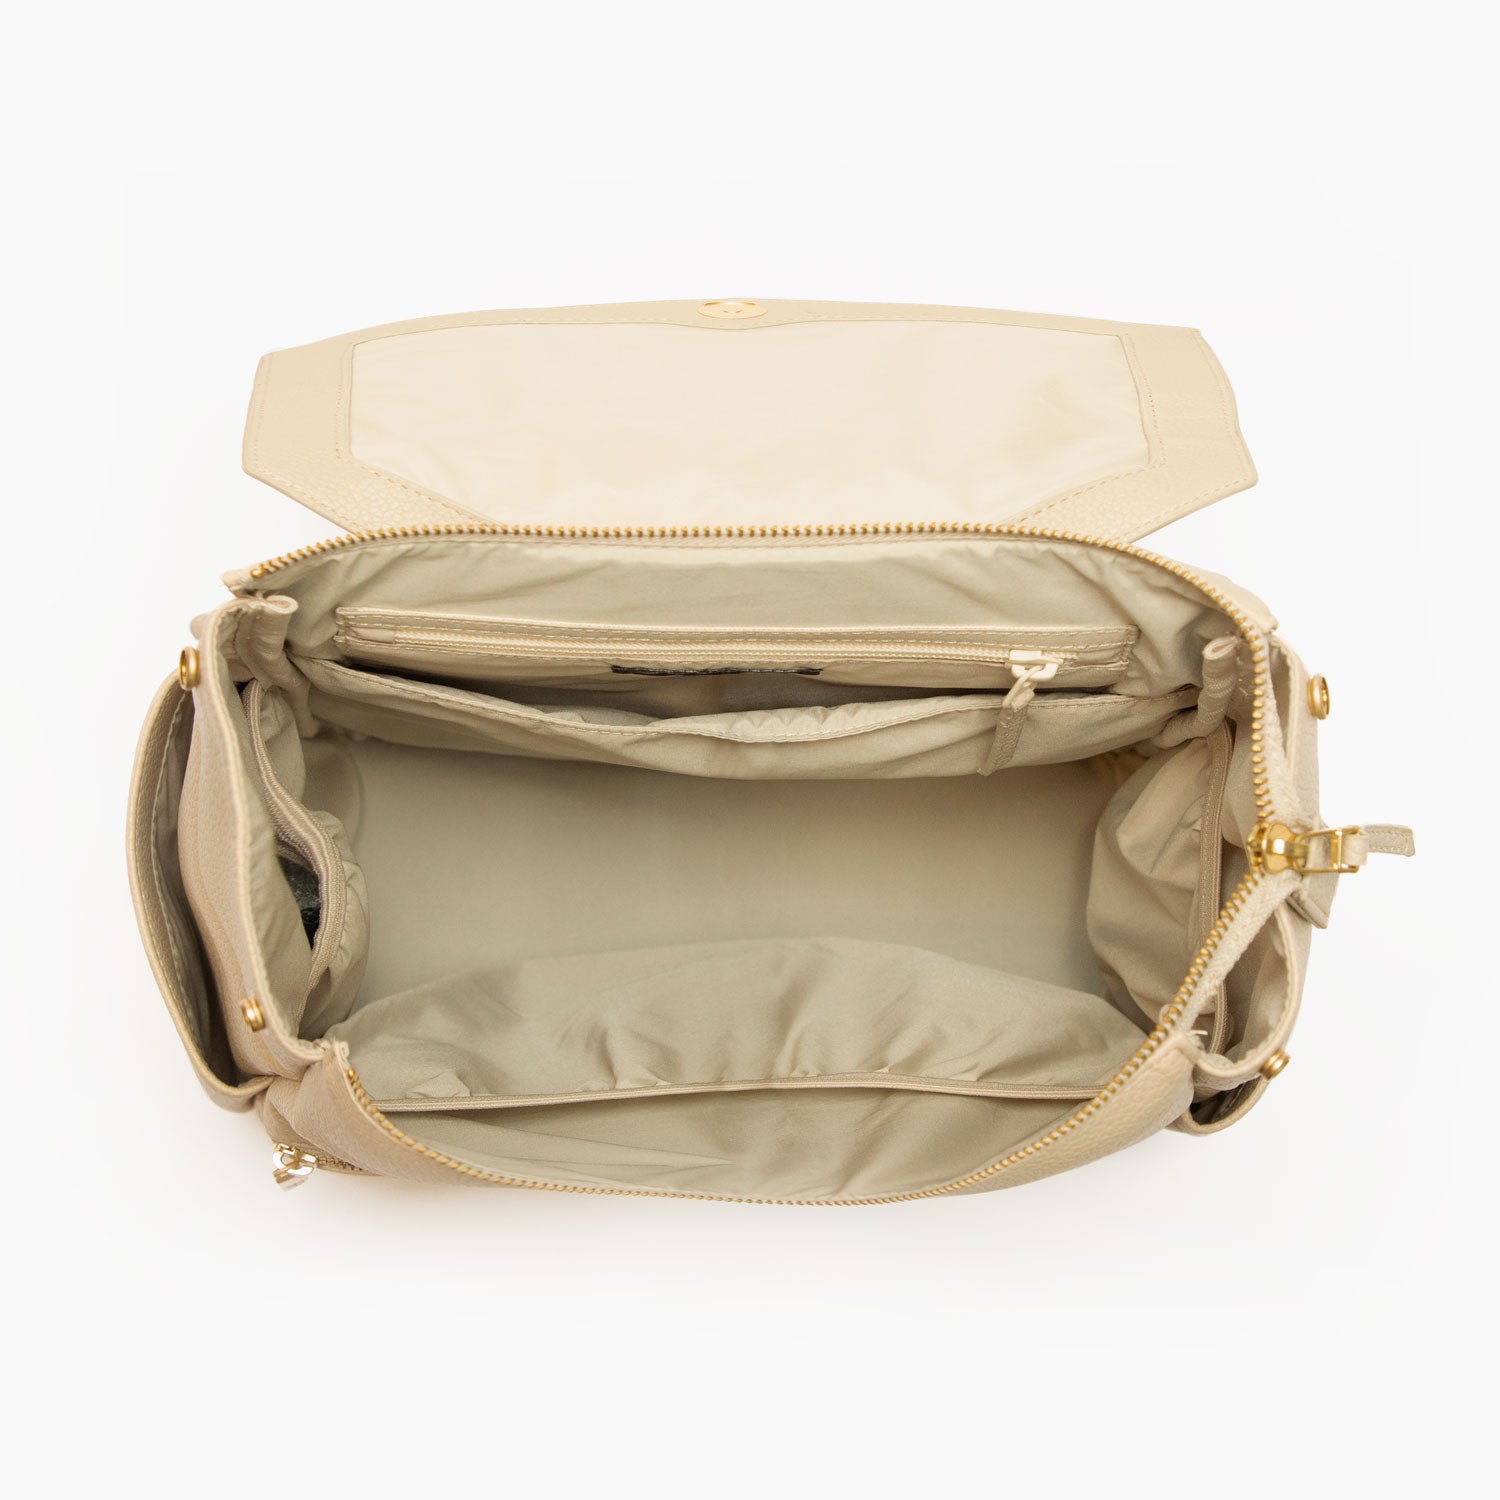 Freshly Picked Classic Diaper Bag - Toffee